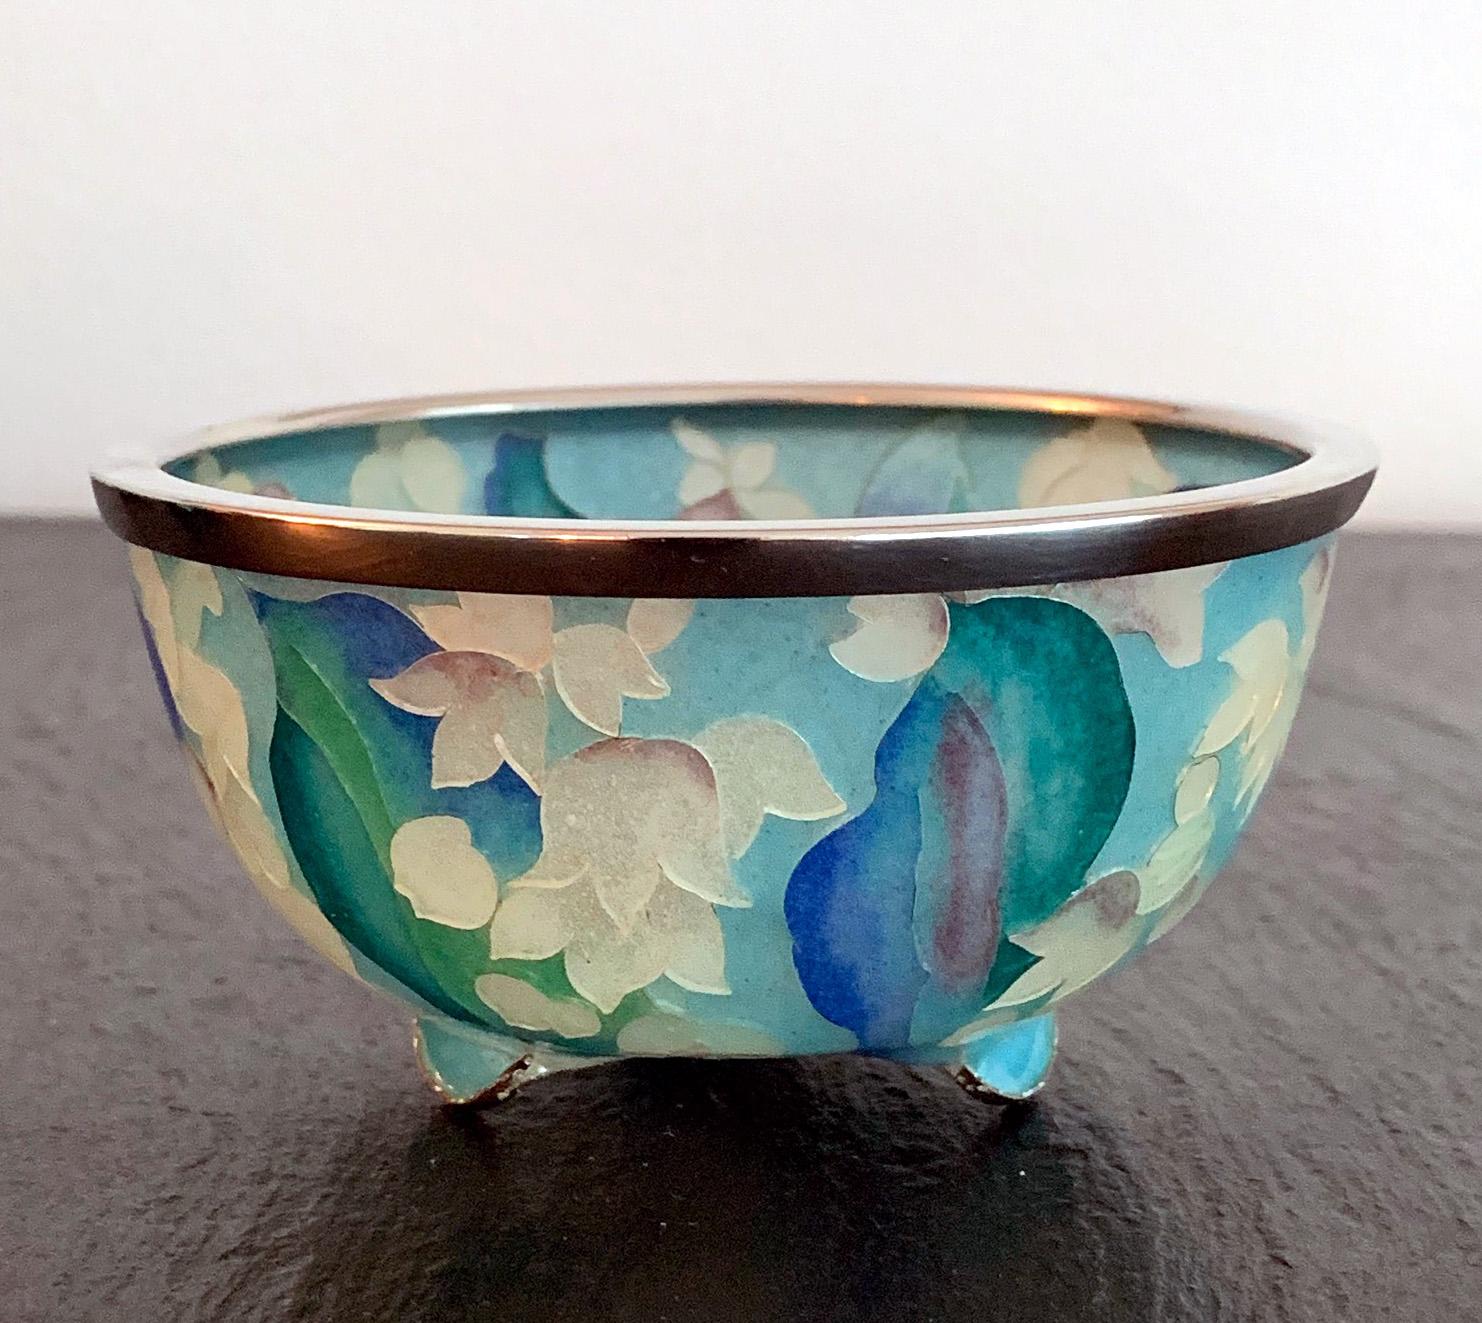 A small but exquisite plique-a-jour cloisonne bowl by Ando Company, likely mid-late 20th century. This is a work of art is crafted entirely with the most refined designs and technique. The pattern features large calla lilies in a brilliant shade of